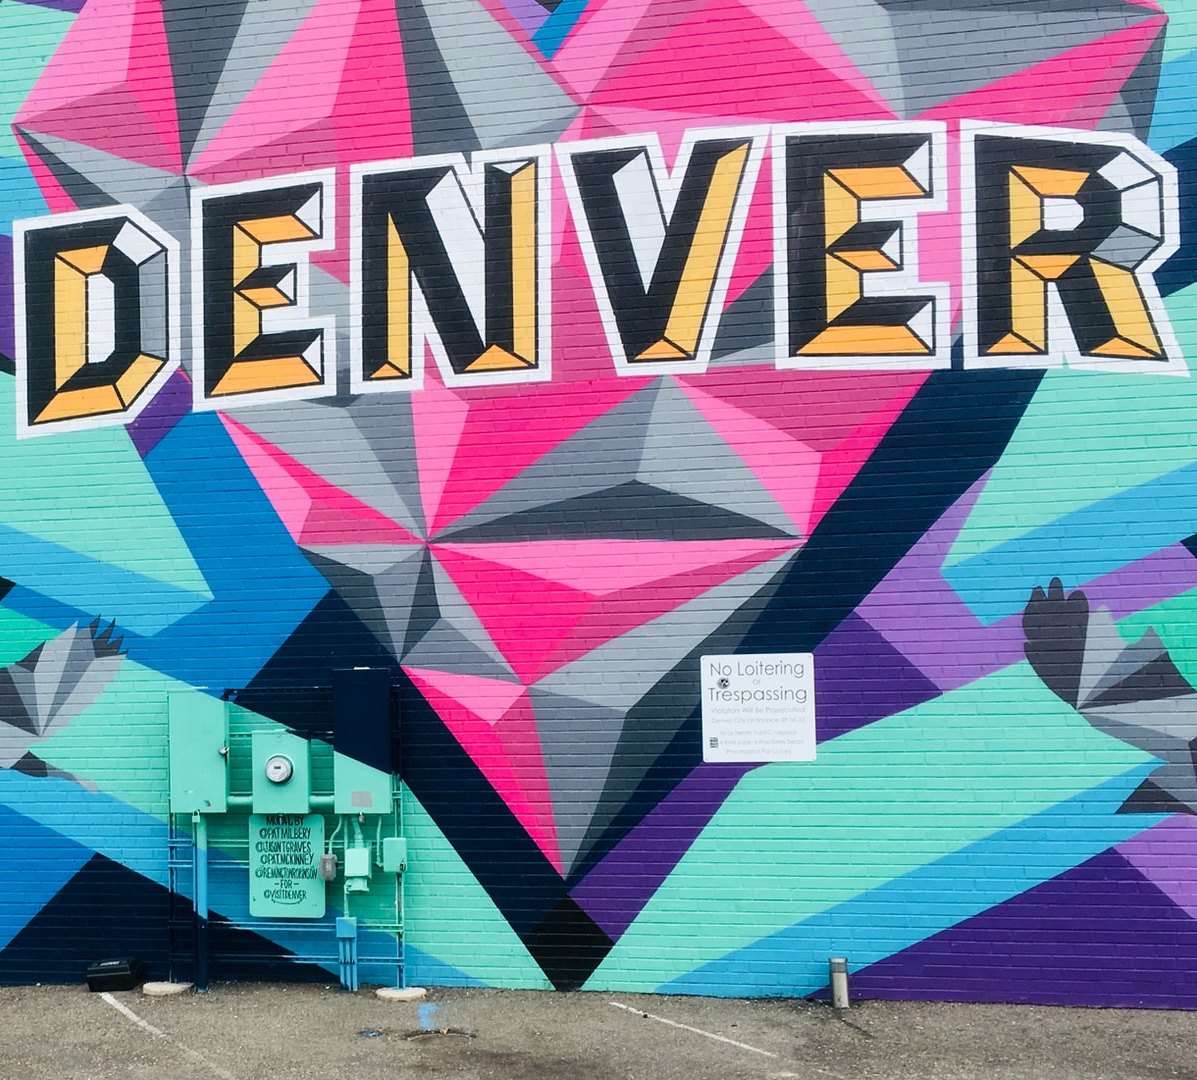 How to Ship Art to Denver with Fine Art Shippers?